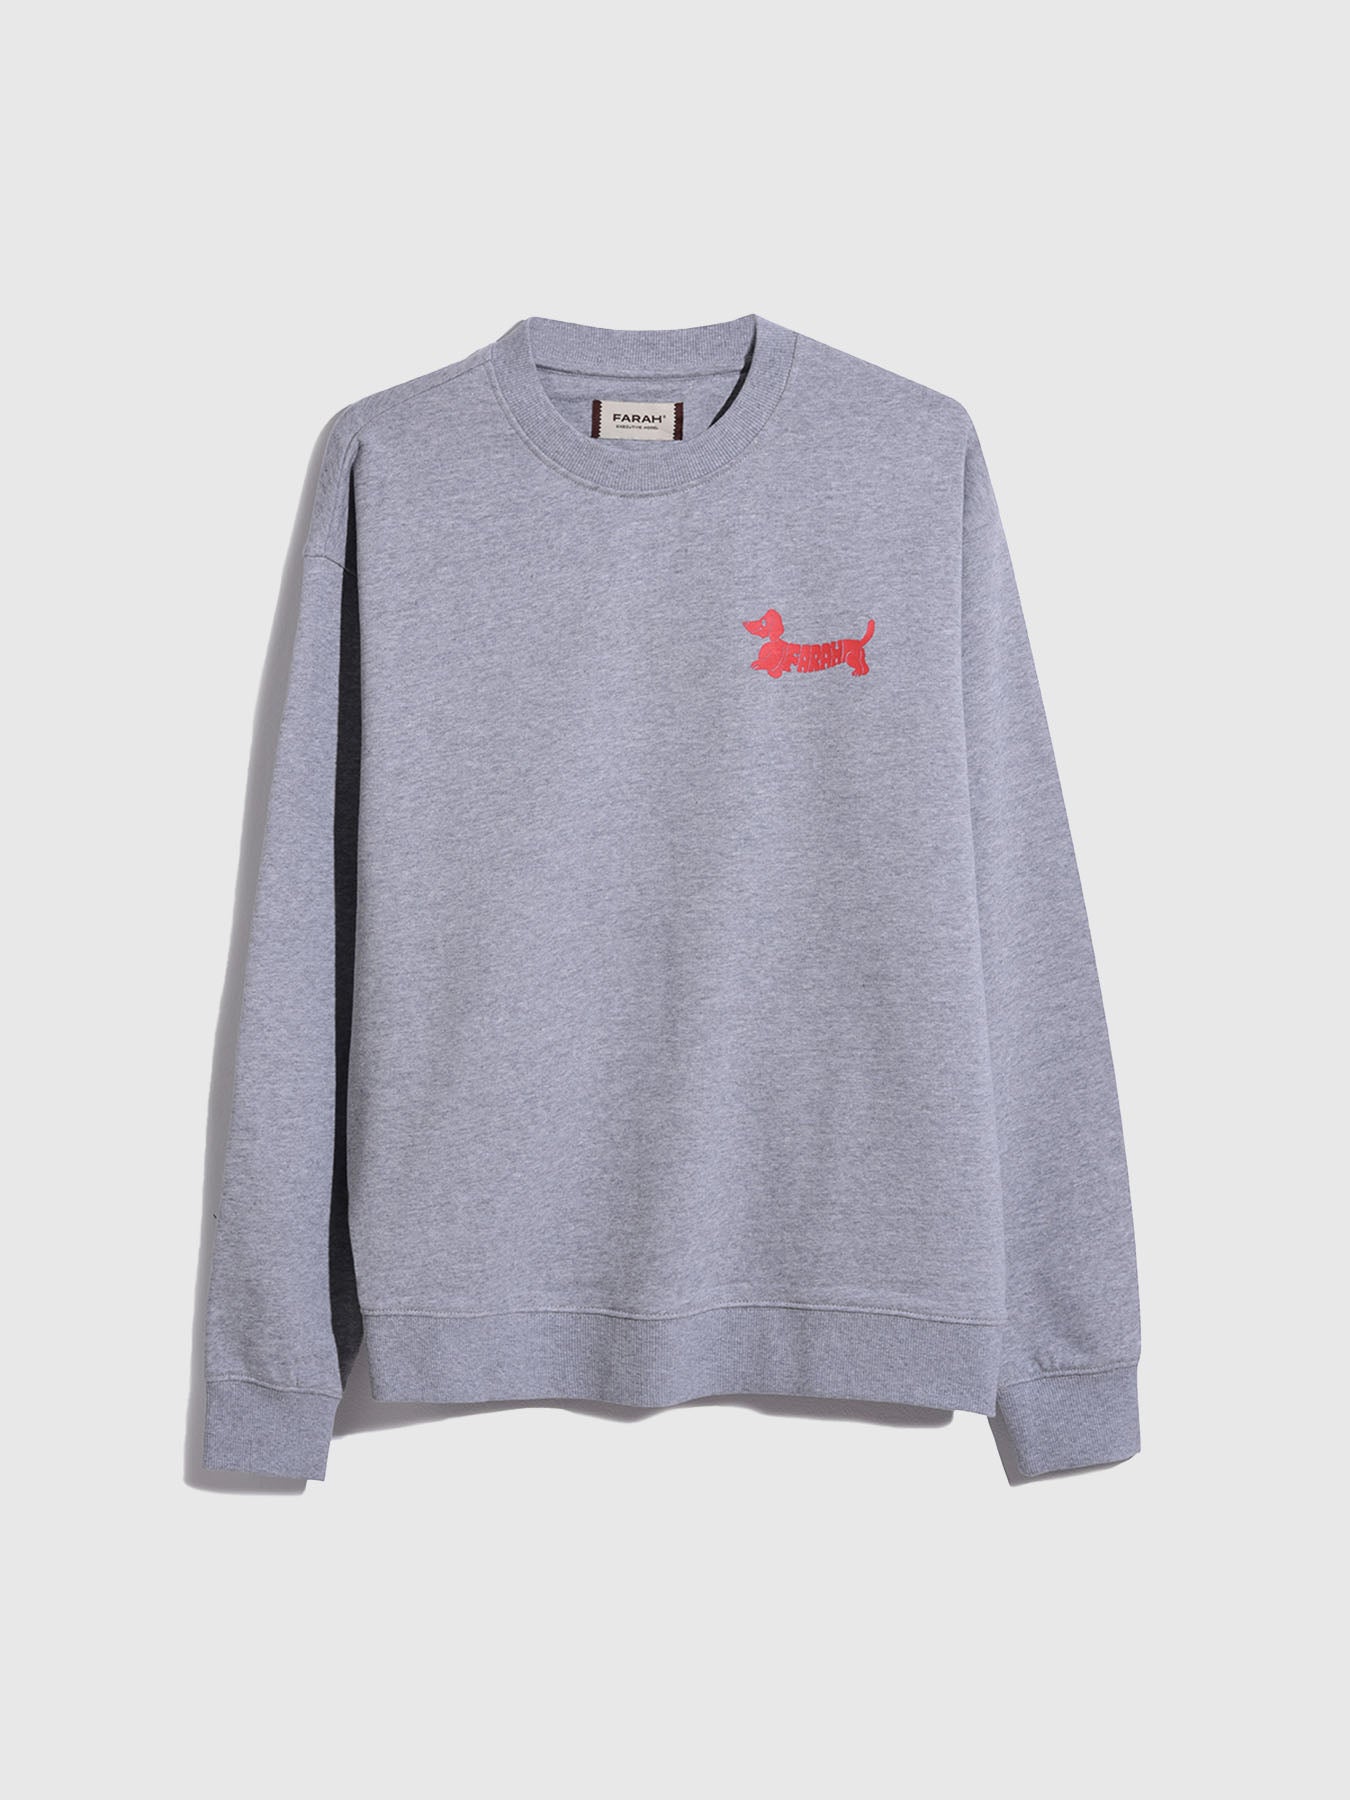 View Puglia Relaxed Fit Crew Neck Graphic Sweatshirt In Light Grey Marl information